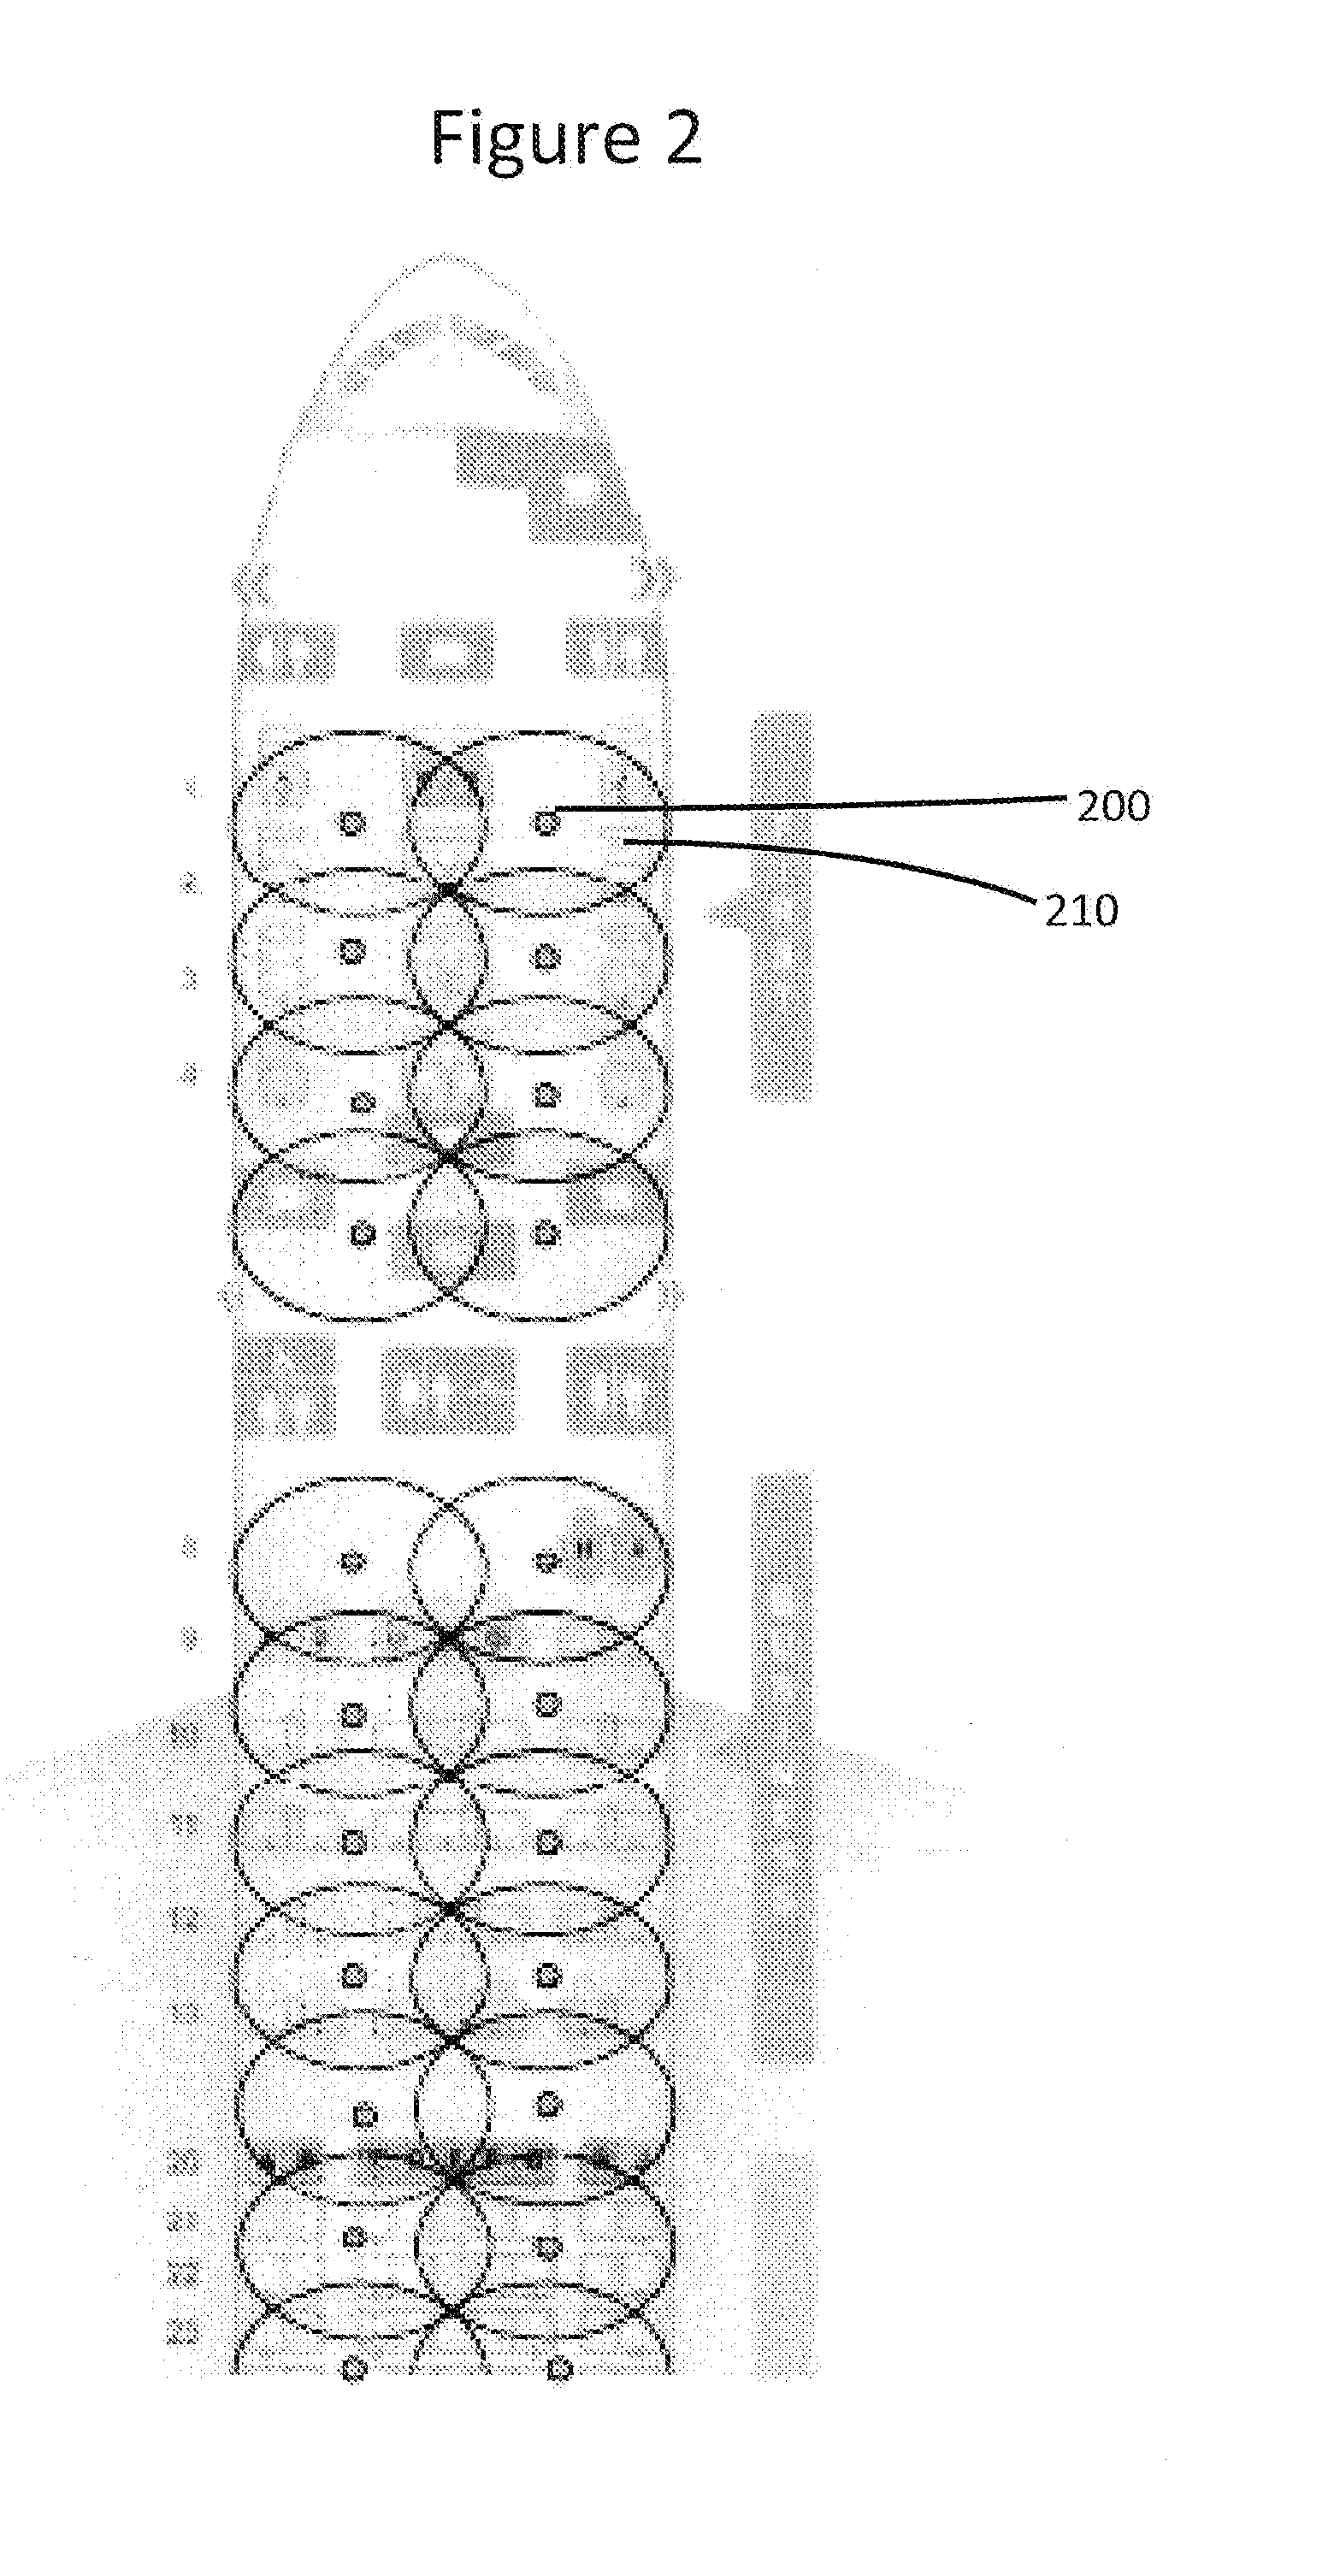 Active noise cancellation method for enclosed cabins